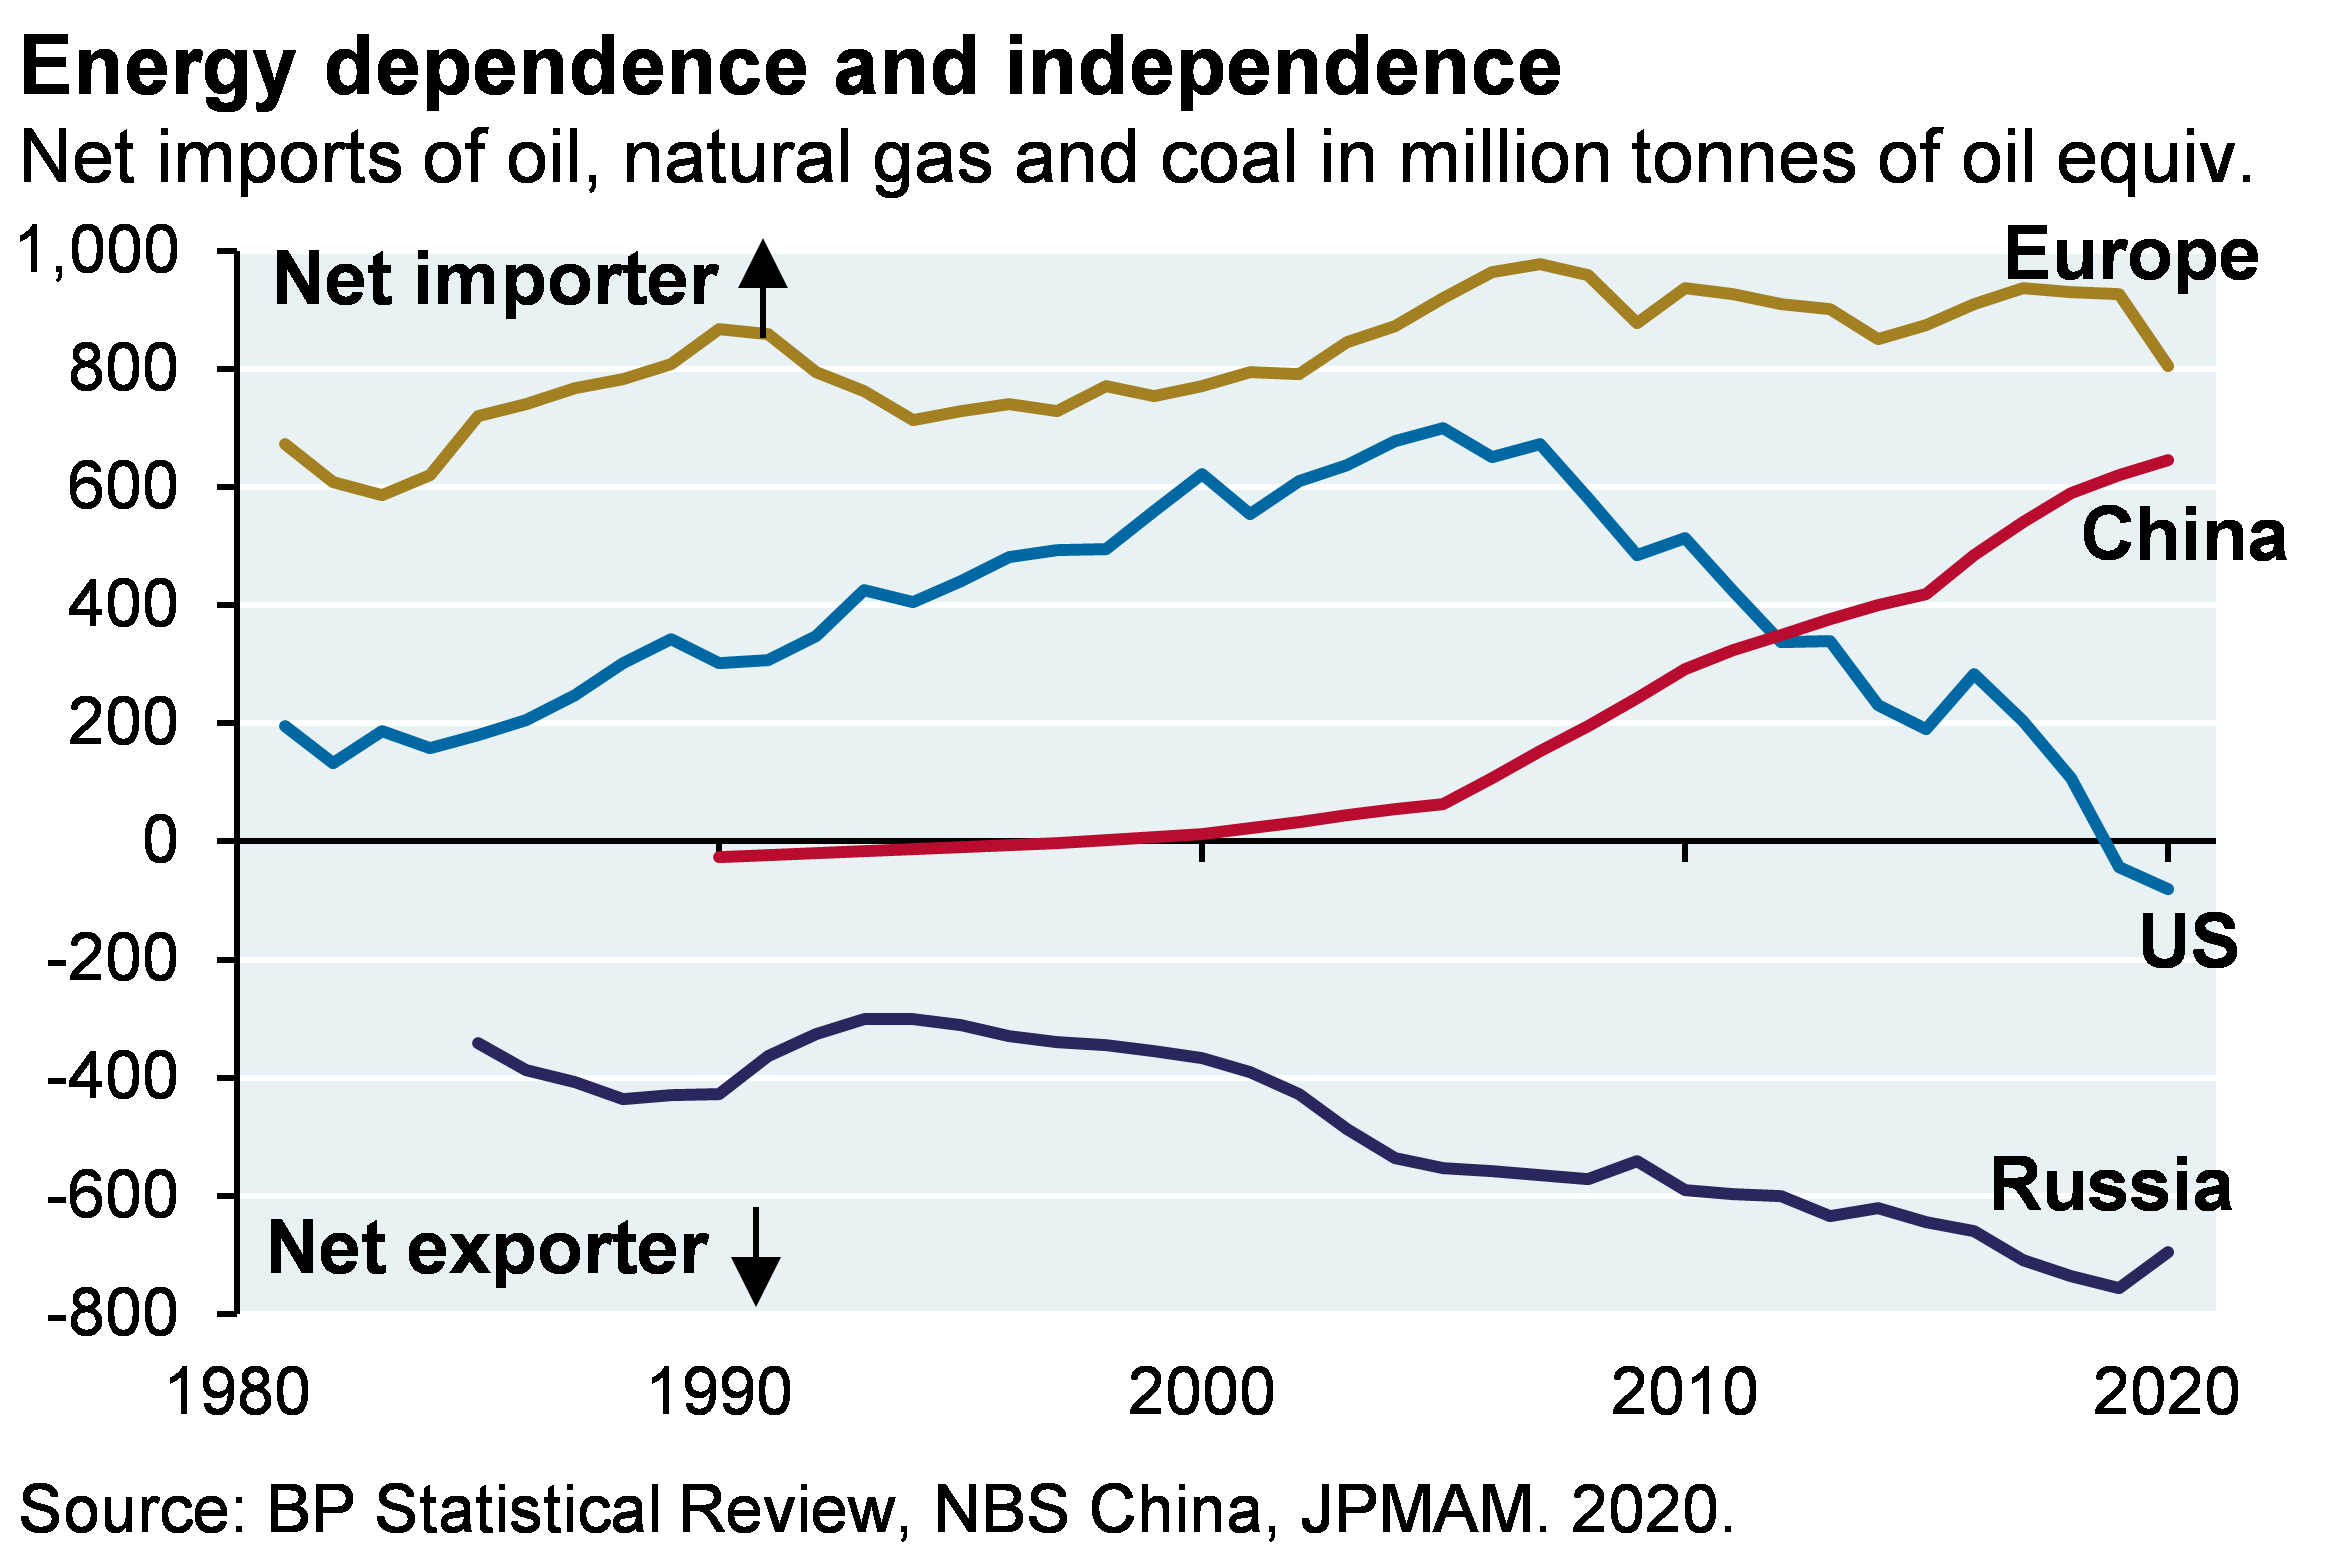 Line chart which shows net imports of oil, natural gas and coal in million tonnes of oil equivalent for Europe, China, the US and Russia. The chart shows that China and Europe are large net importers of energy while Russia is a large exporter. 